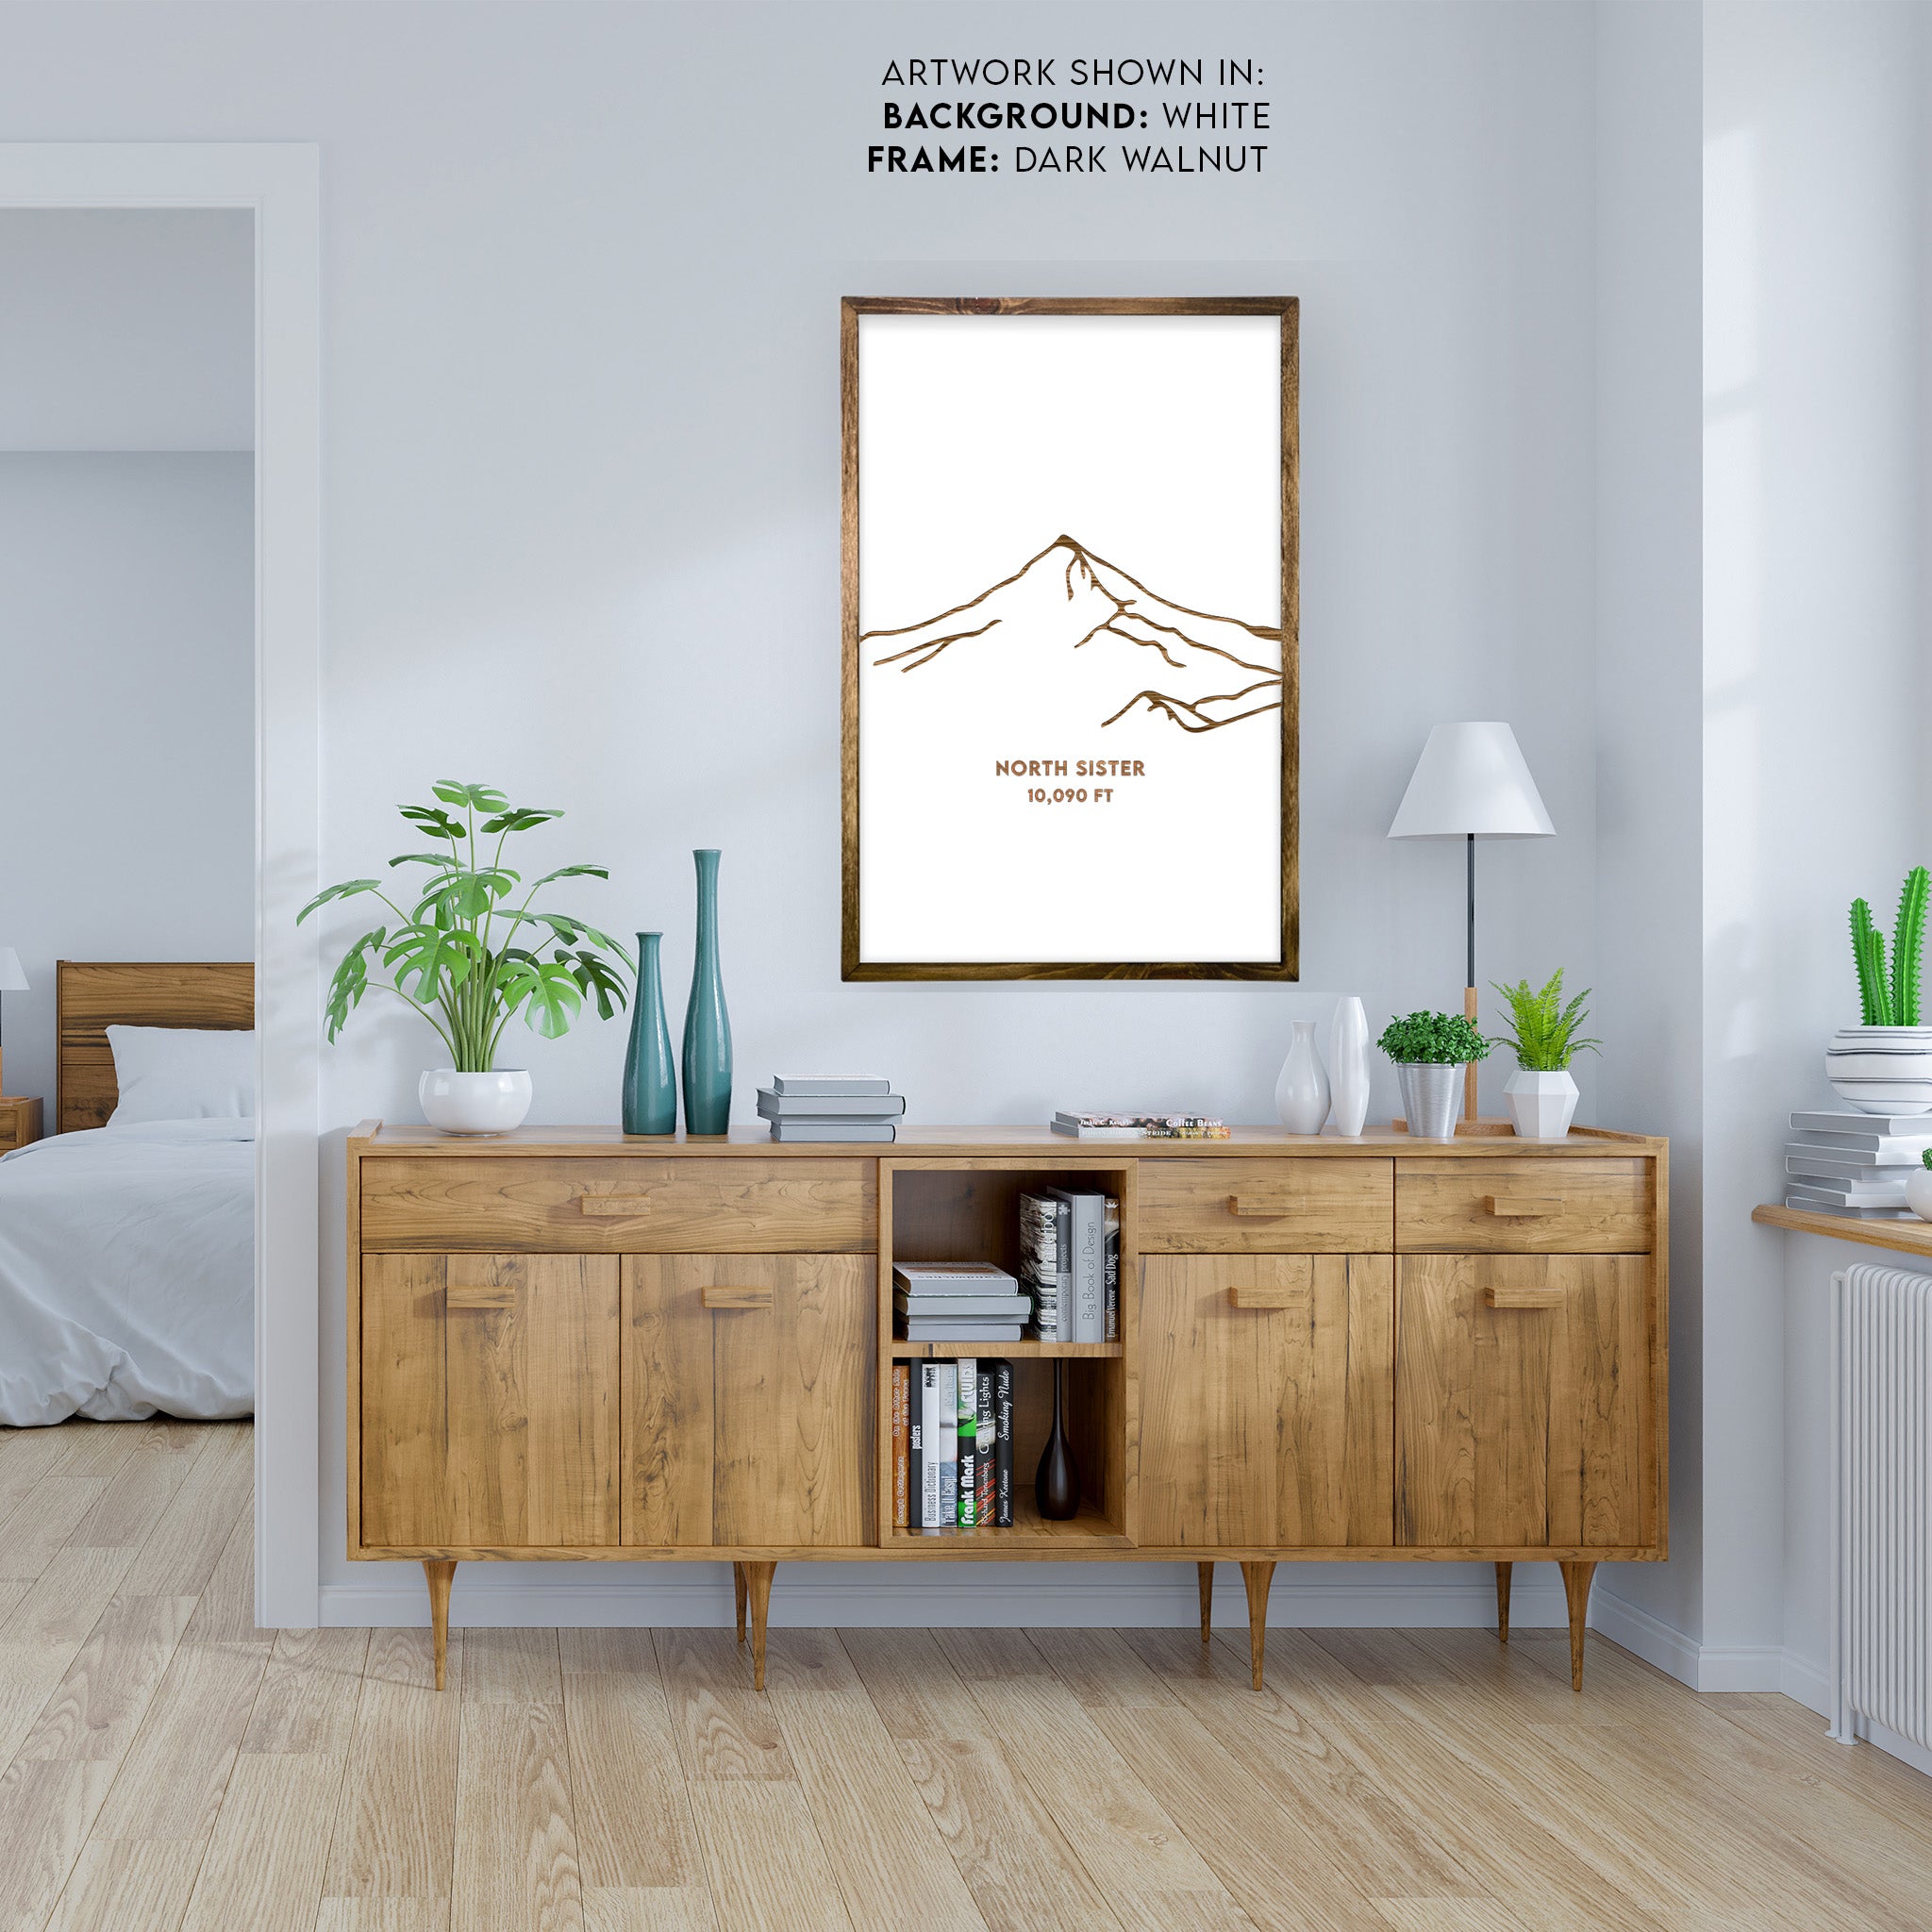 South Sister Mountain Engraved Wall Art